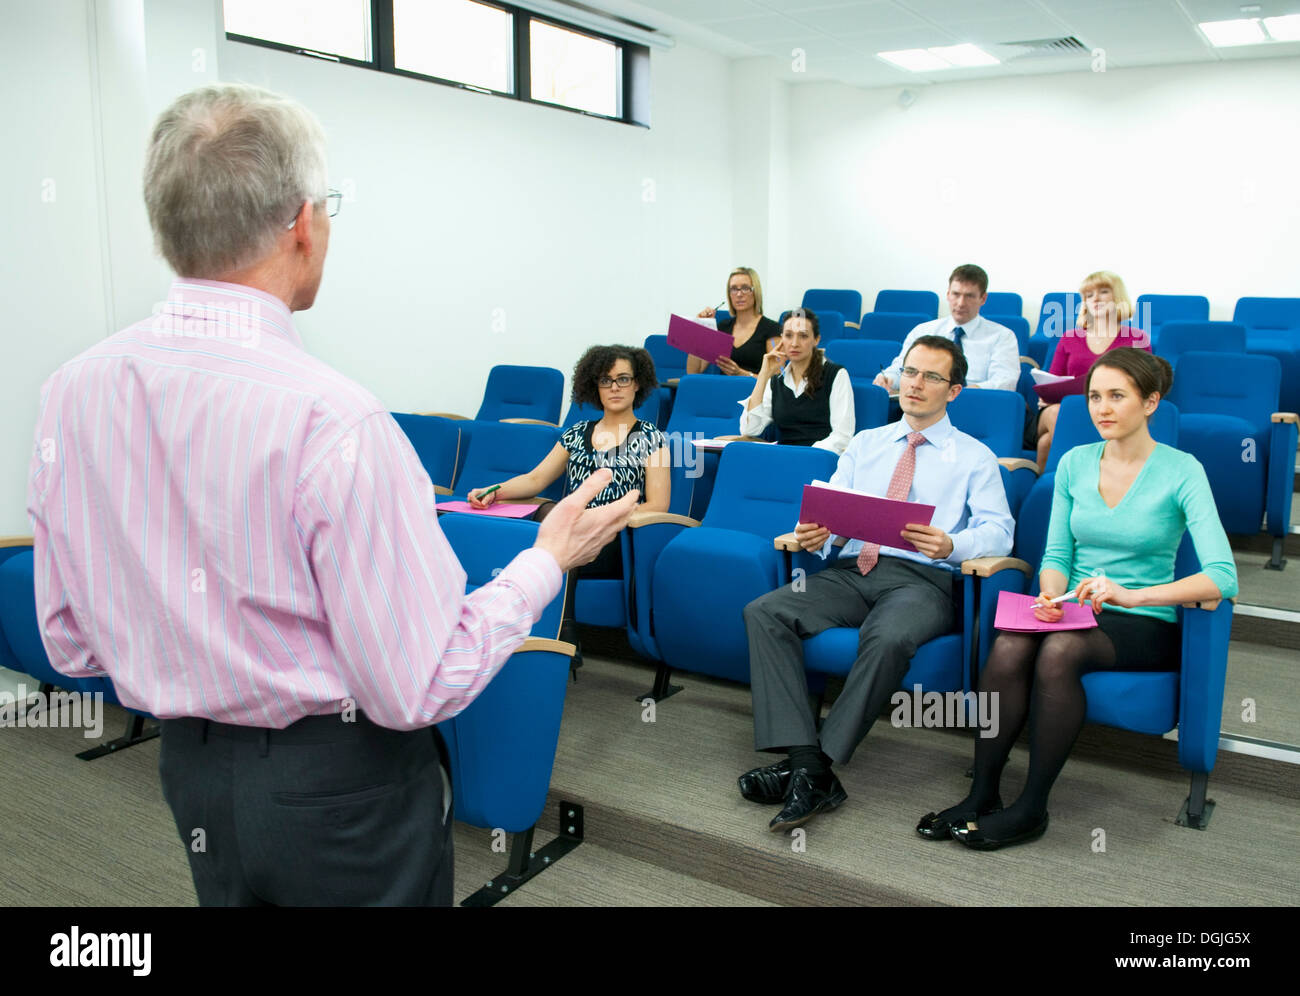 Presenter speaking to group of colleagues Stock Photo